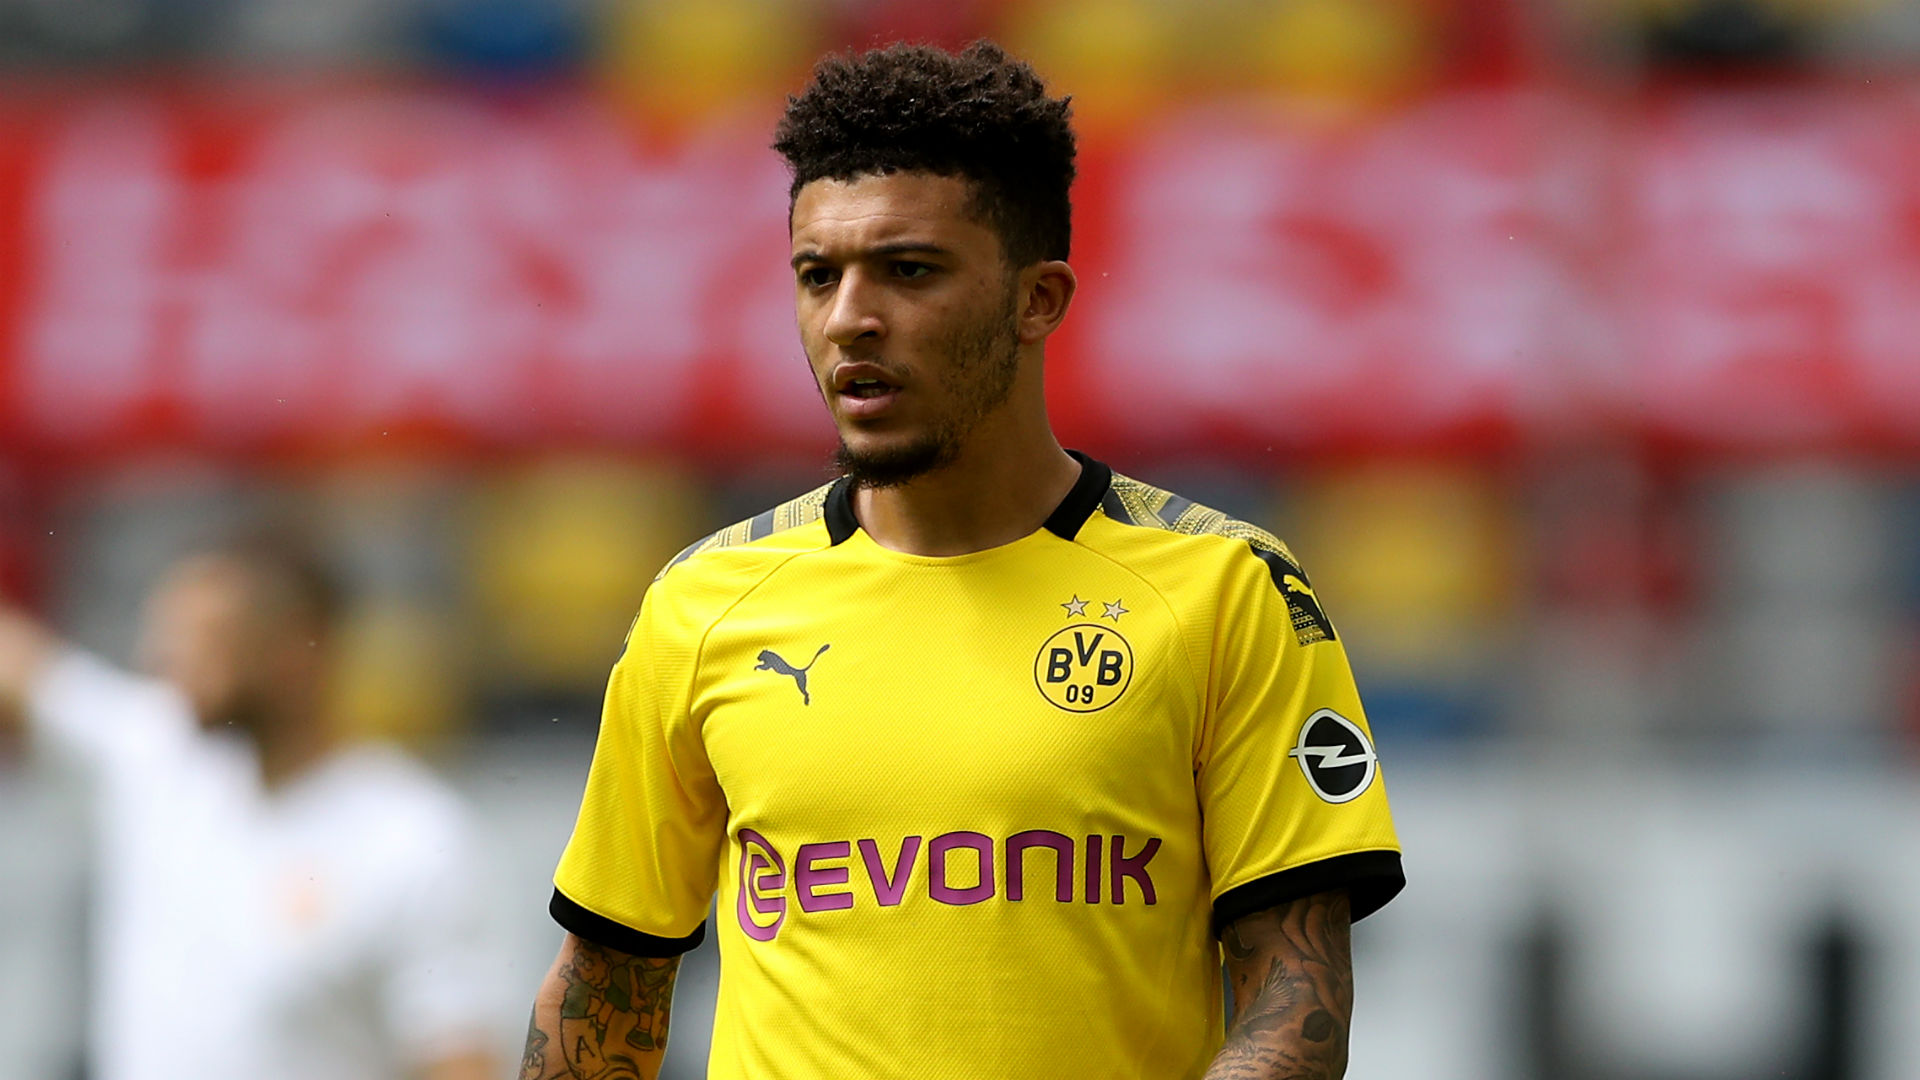 As Manchester United chase Jadon Sancho, Borussia Dortmund are unmoved.